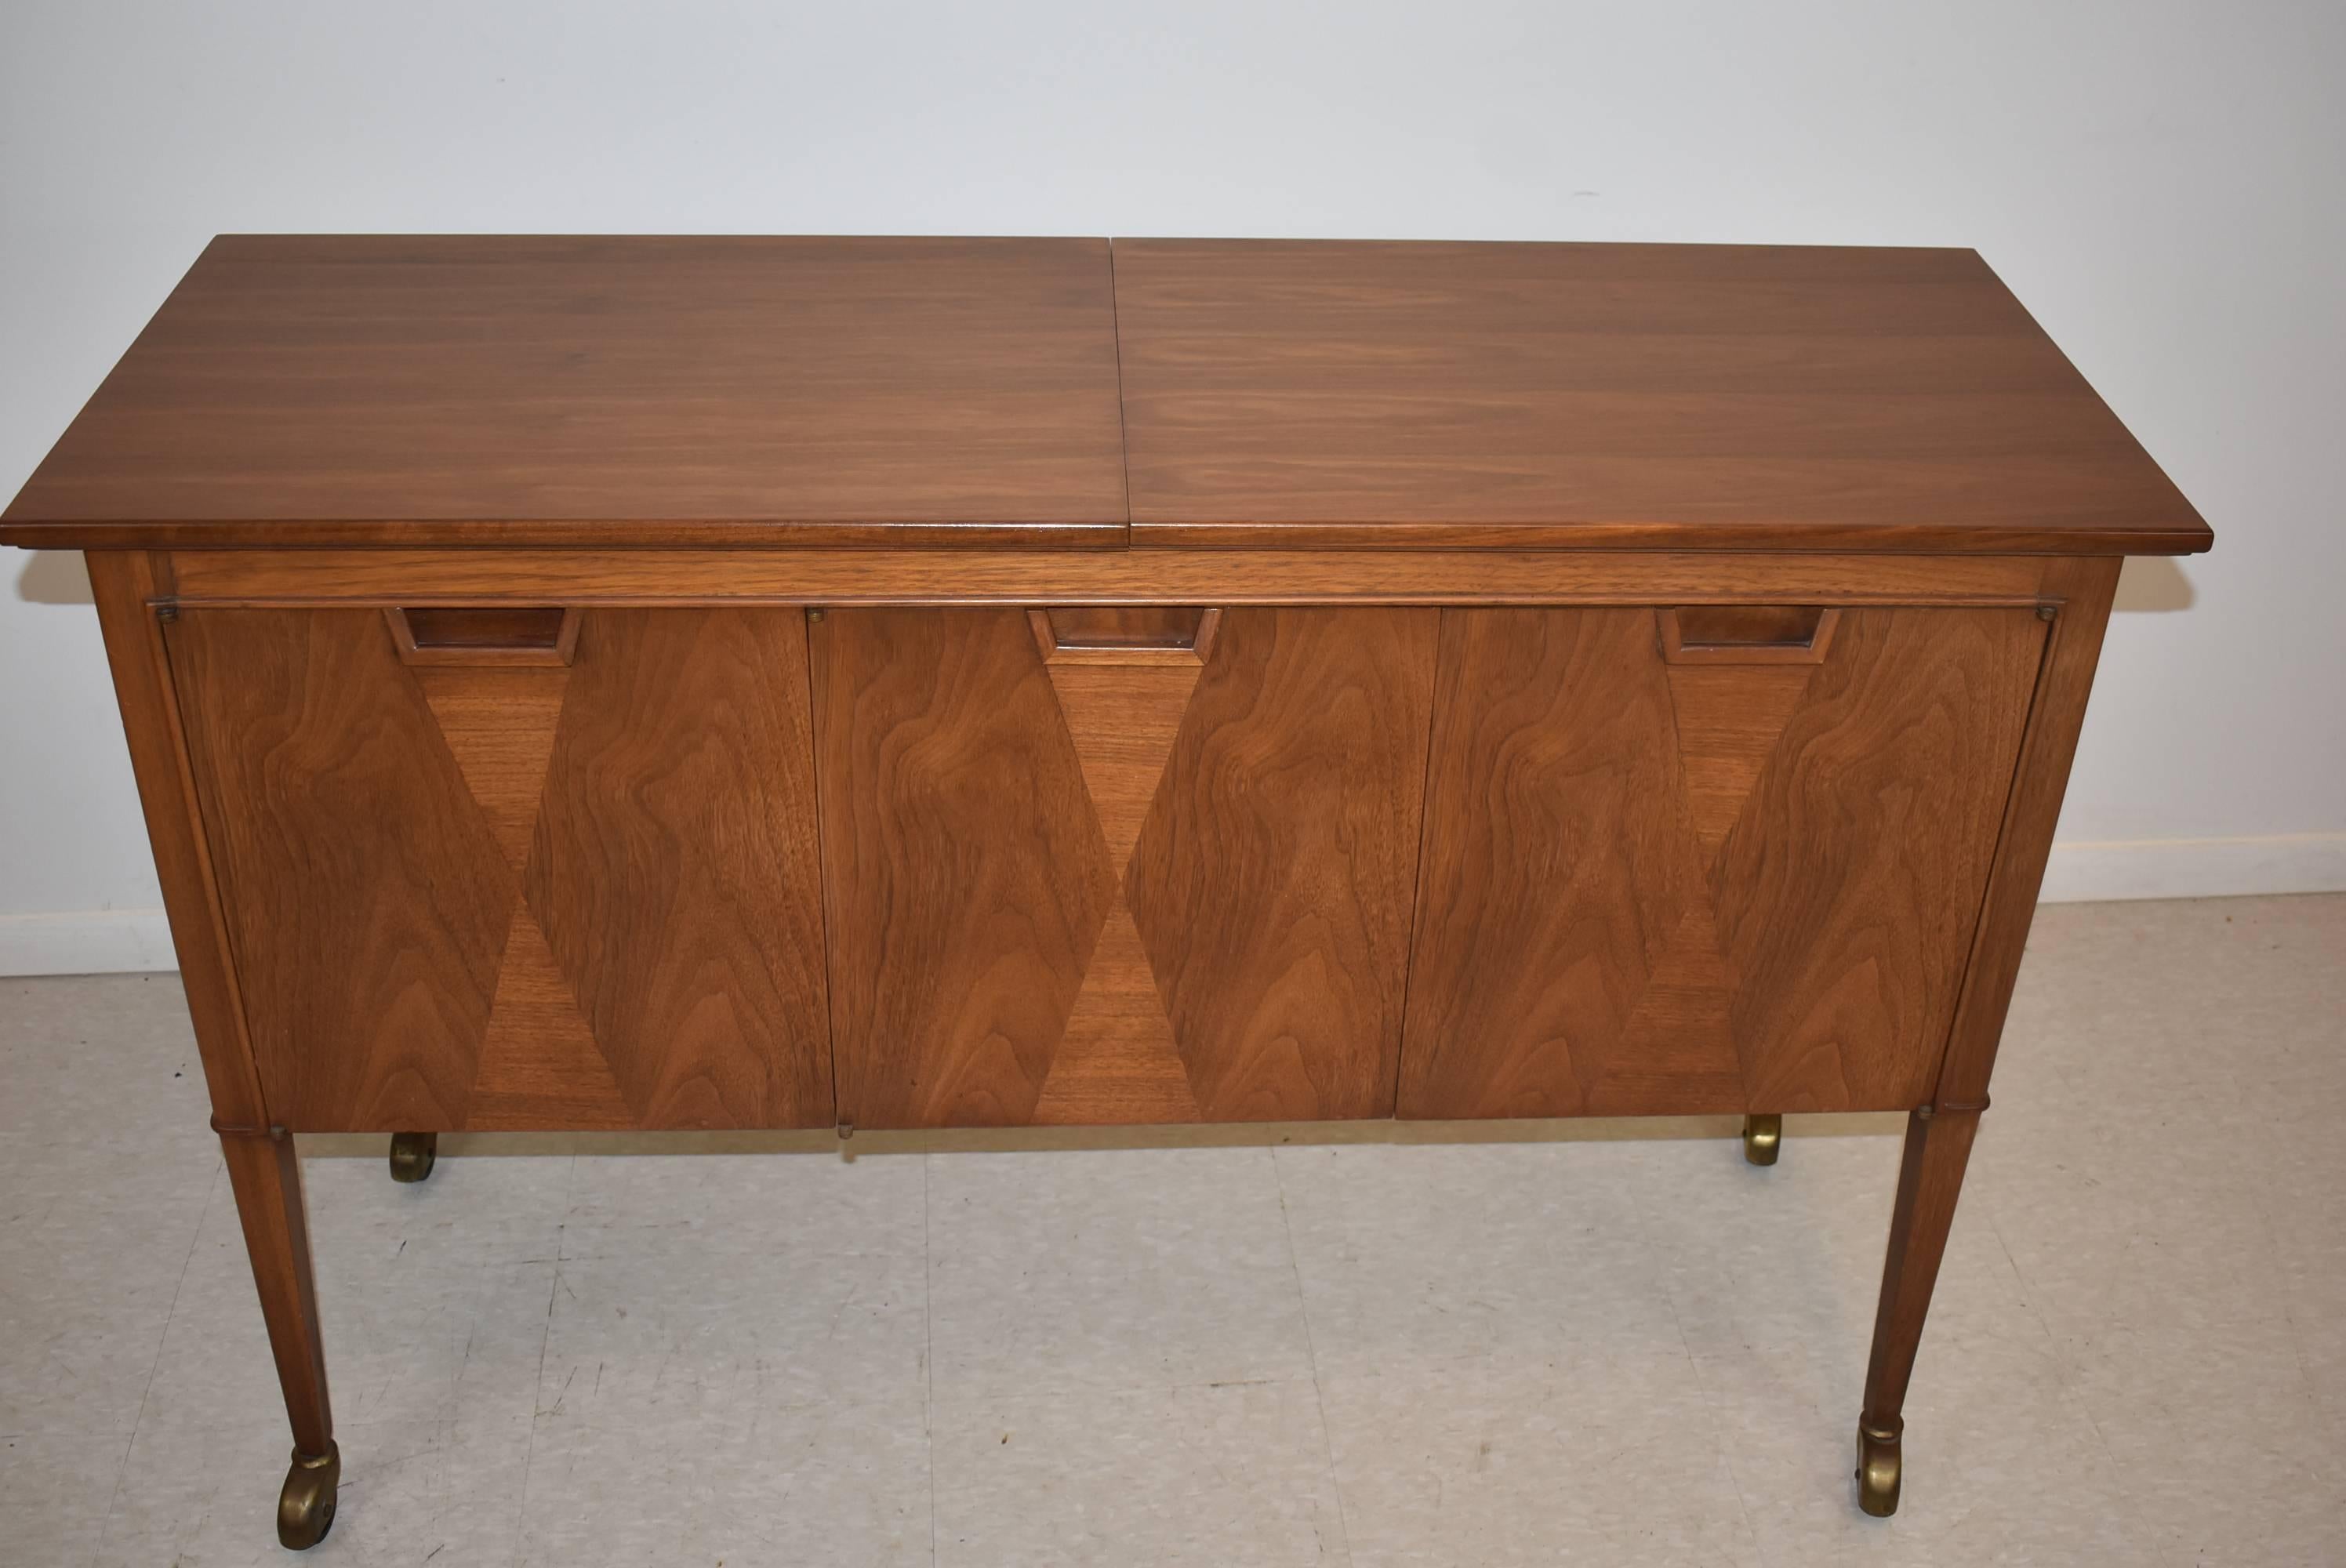 Mid-Century Modern credenza/rolling bar cart made by the Mount Airy Furniture Co. Of North Carolina- Janus Collection. Walnut bar cart with contrasting Triangle walnut inlays on the doors. This Cart can be placed in the middle of a room or in a